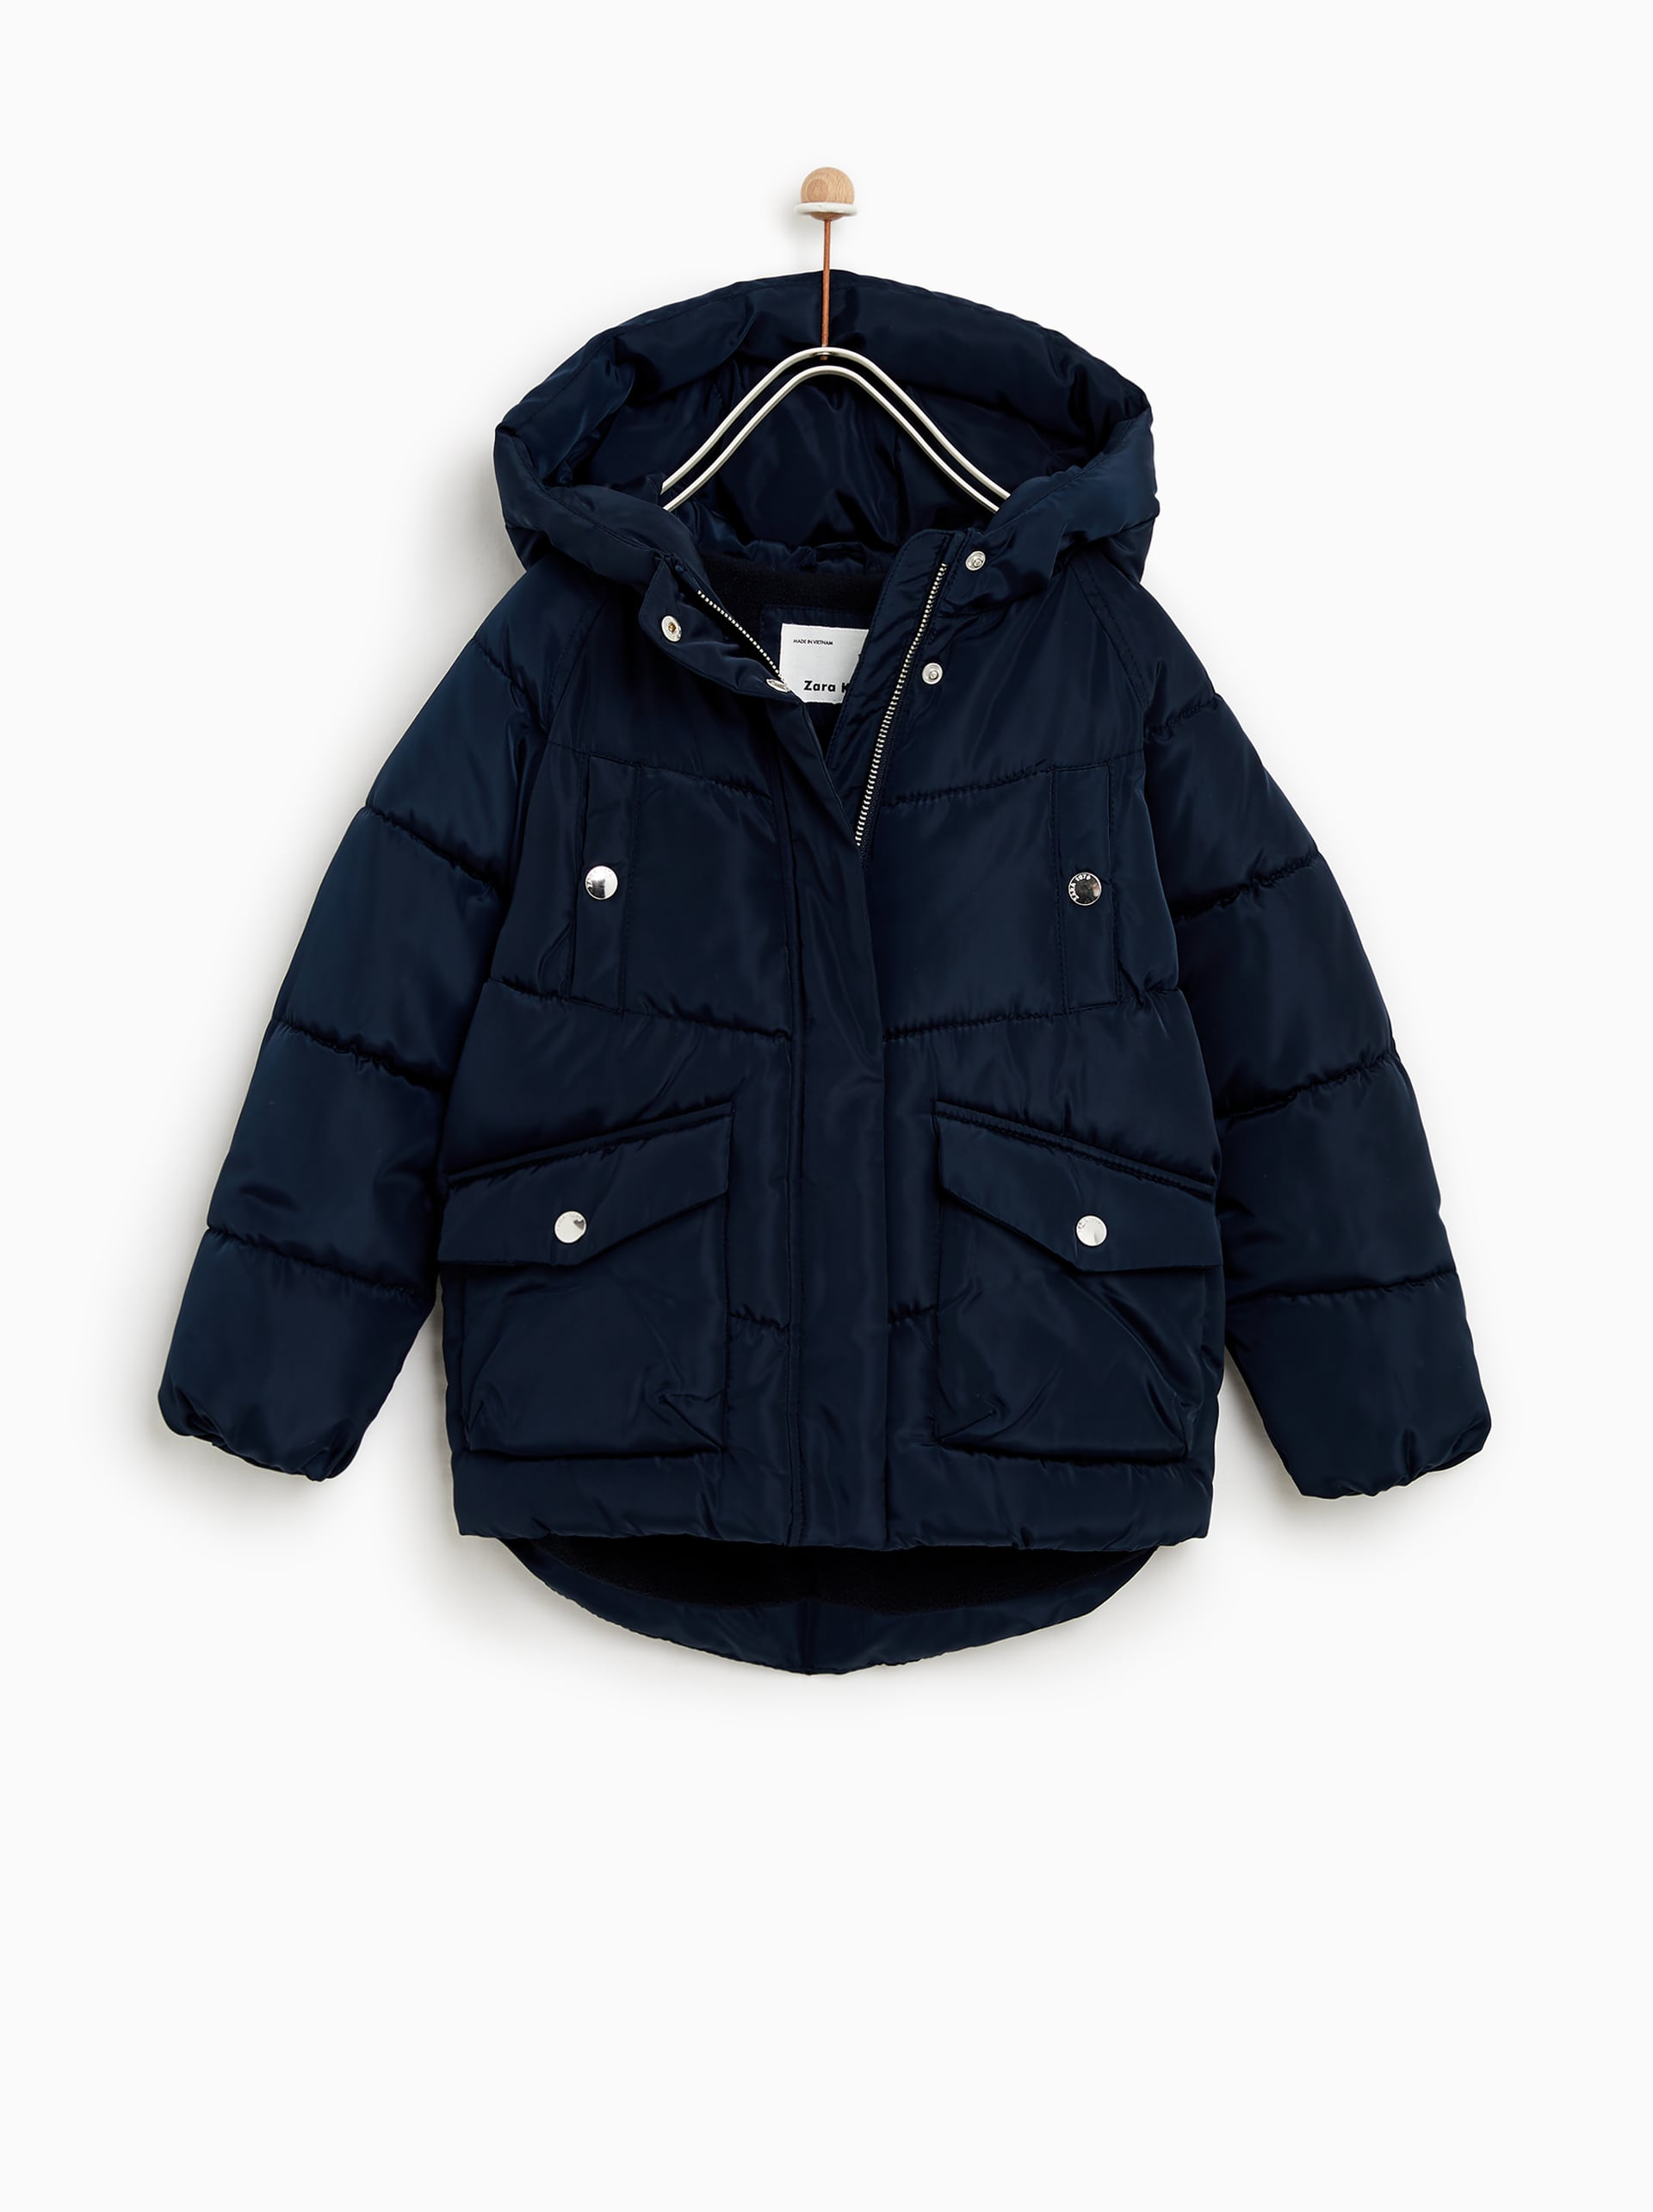 Zara PUFFER JACKET WITH HOOD at £19.99 | love the brands